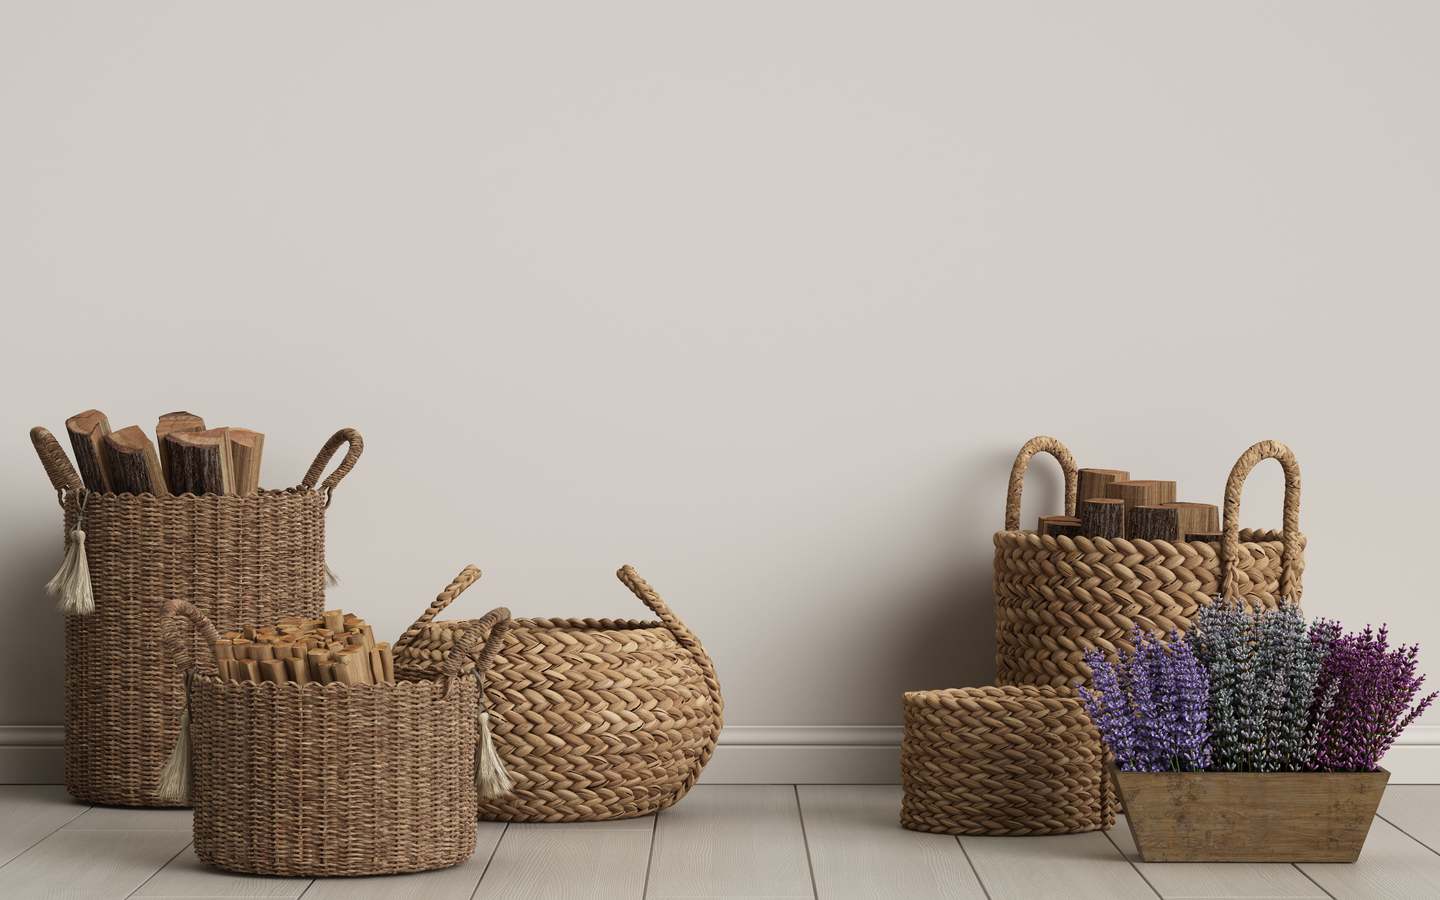 Different shapes of wicker baskets